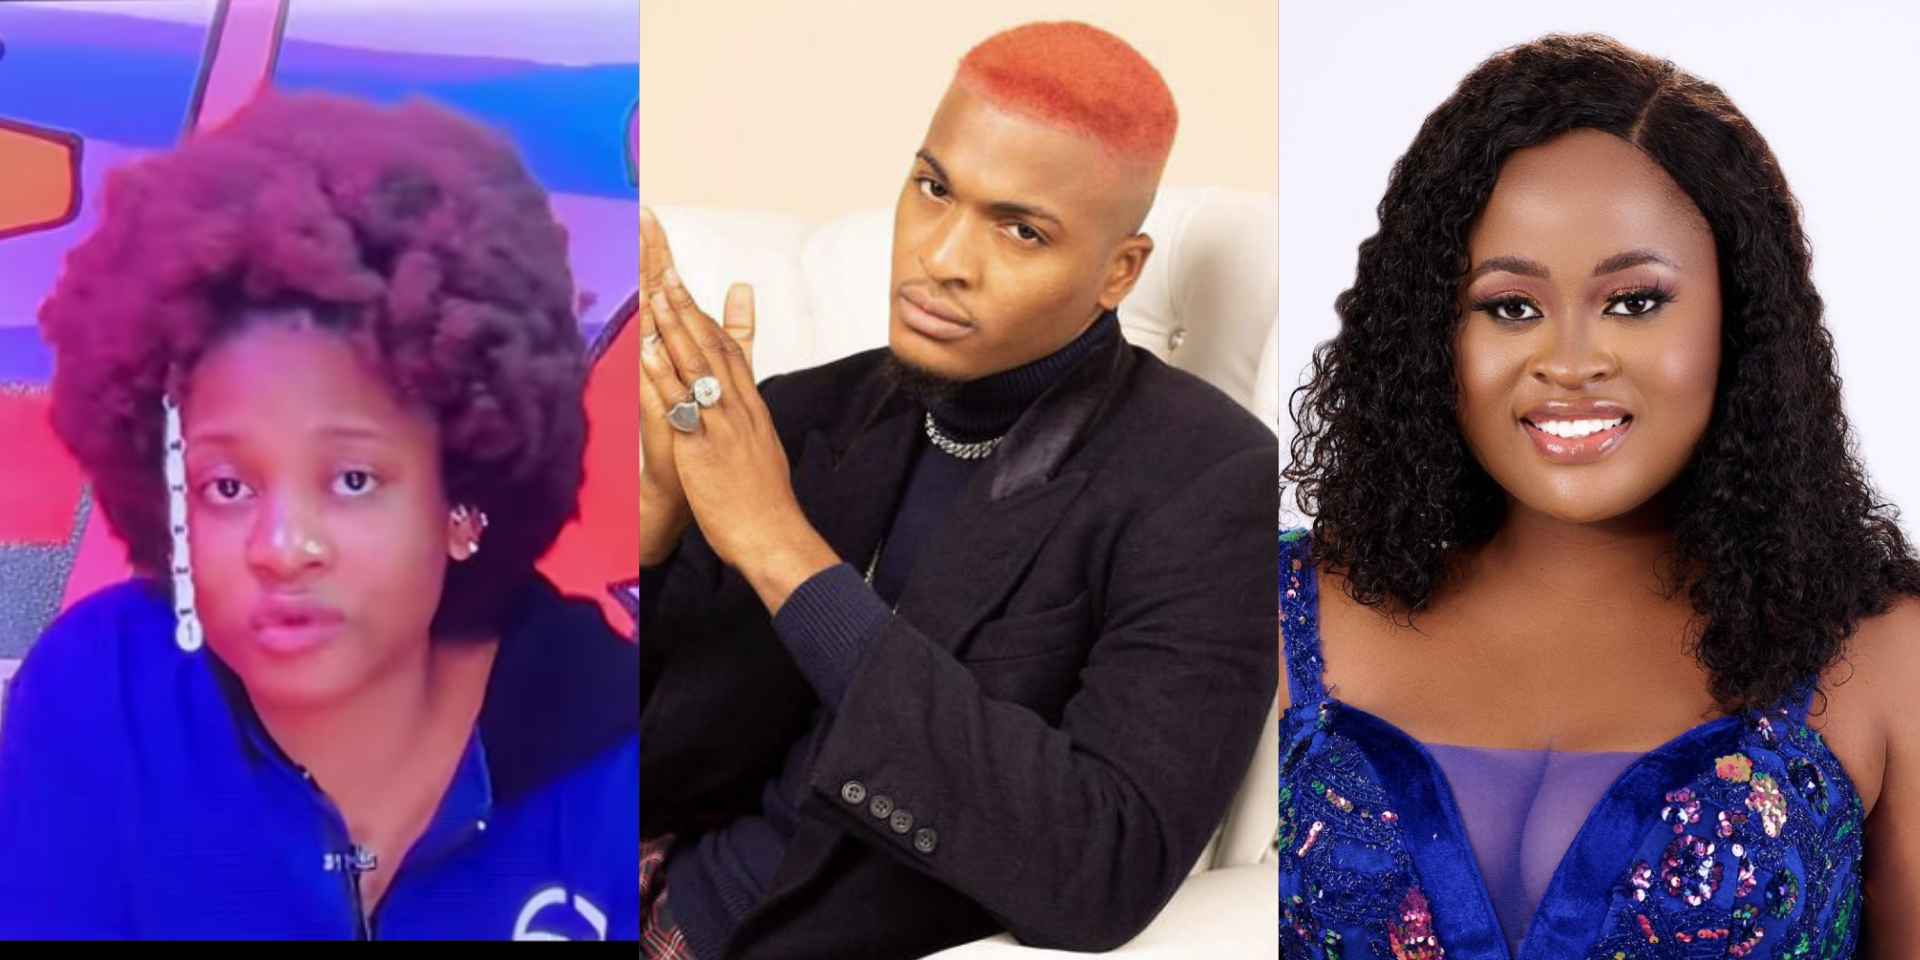 BBNaija: "We all came individually" - Phyna speaks on ending friendship with Amaka over Groovy relationship [Video]